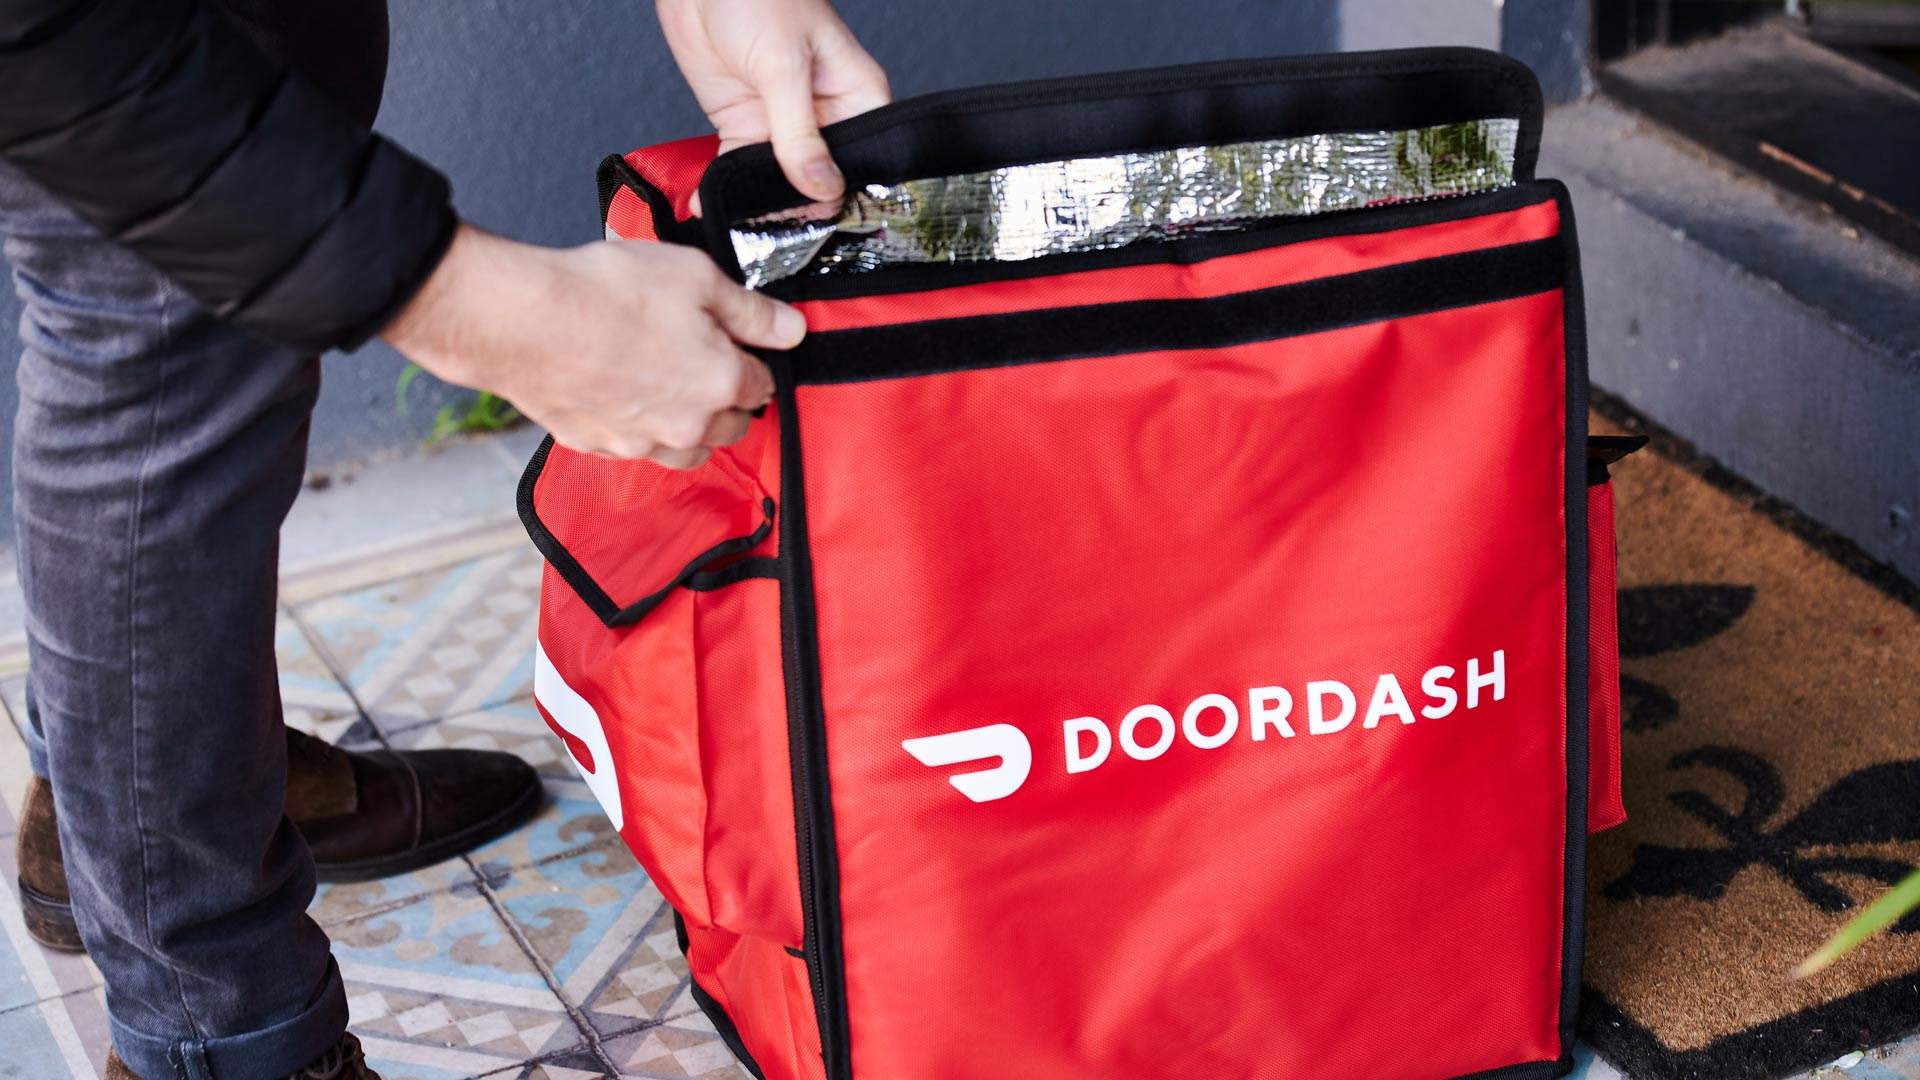 America's Largest On-Demand Food Delivery Service DoorDash Has Arrived in Australia